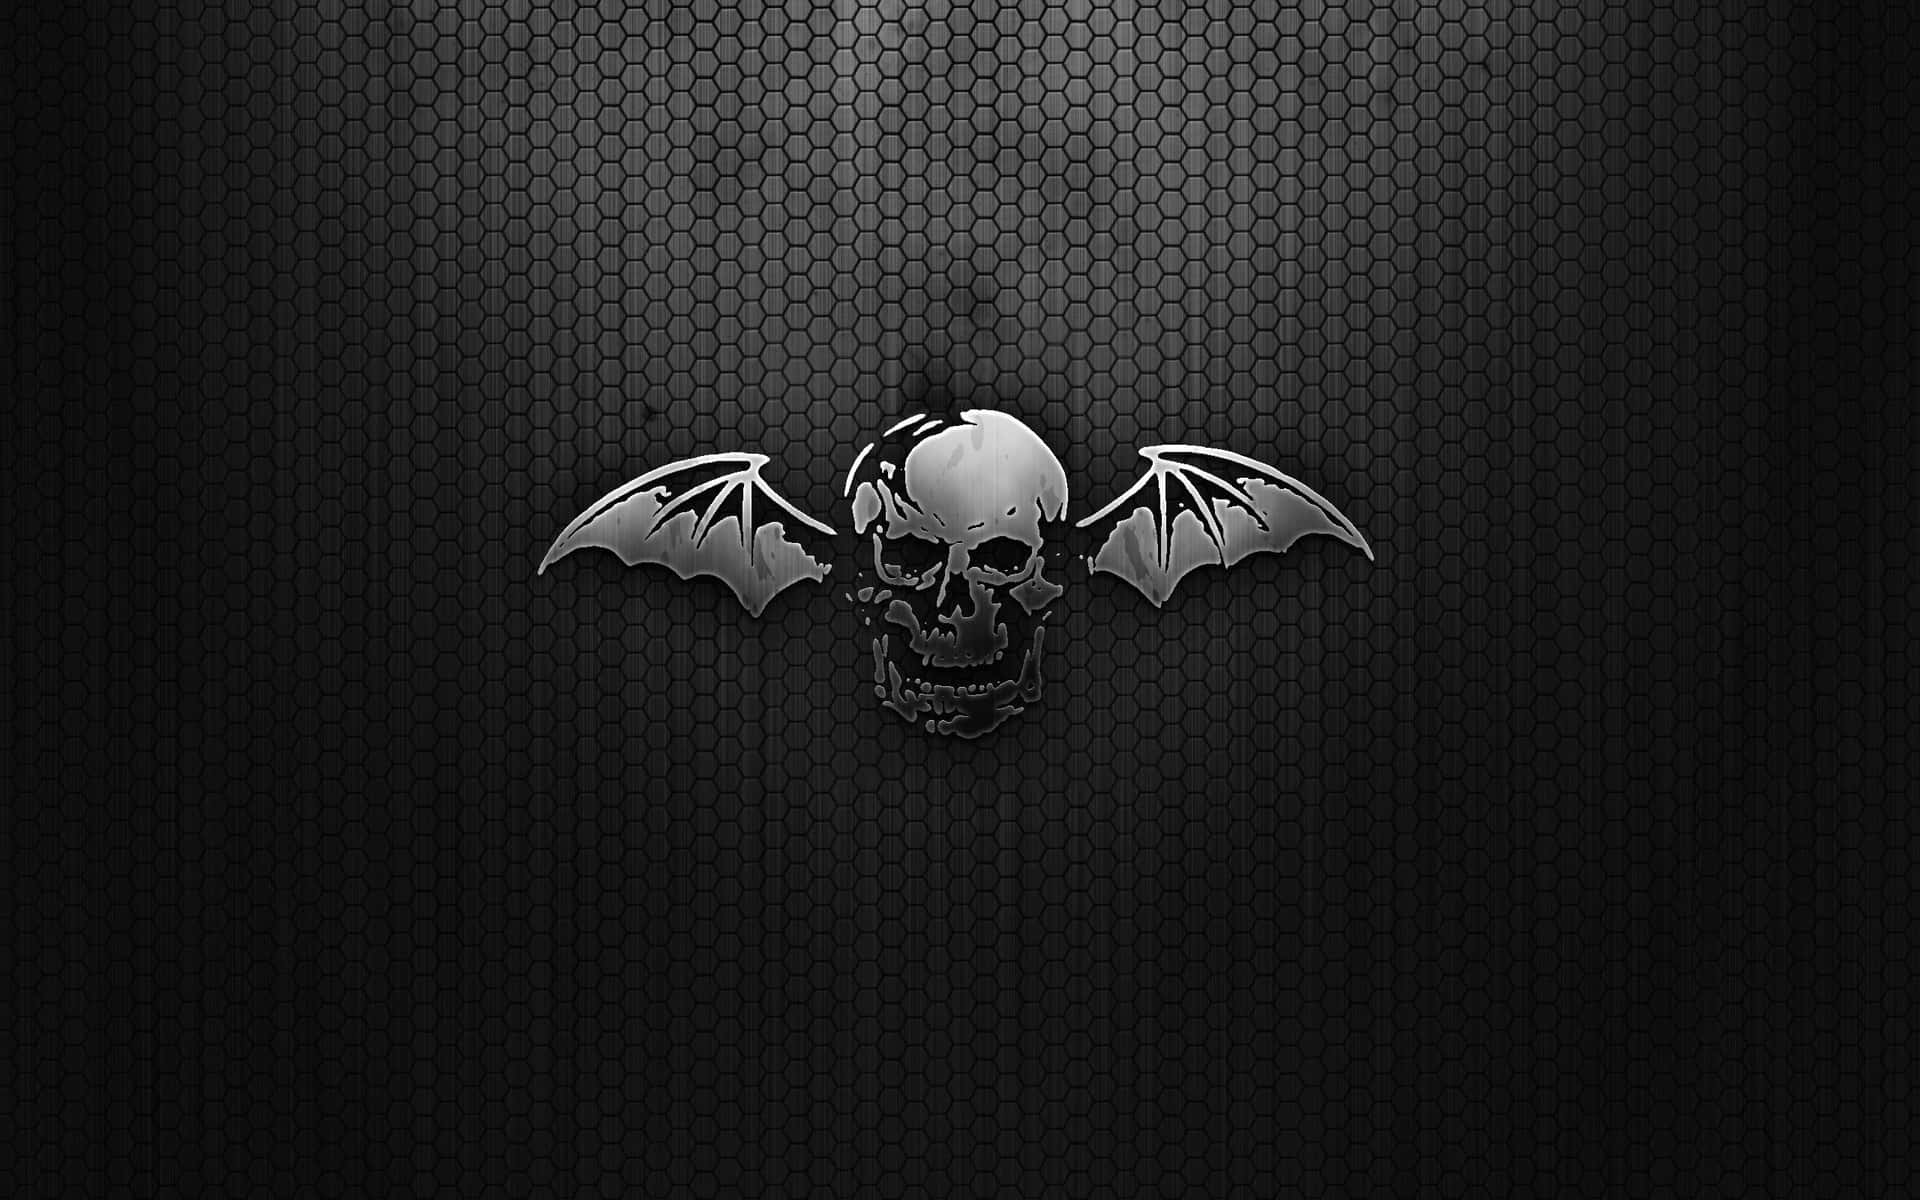 Avenged Sevenfold rocks out on stage Wallpaper